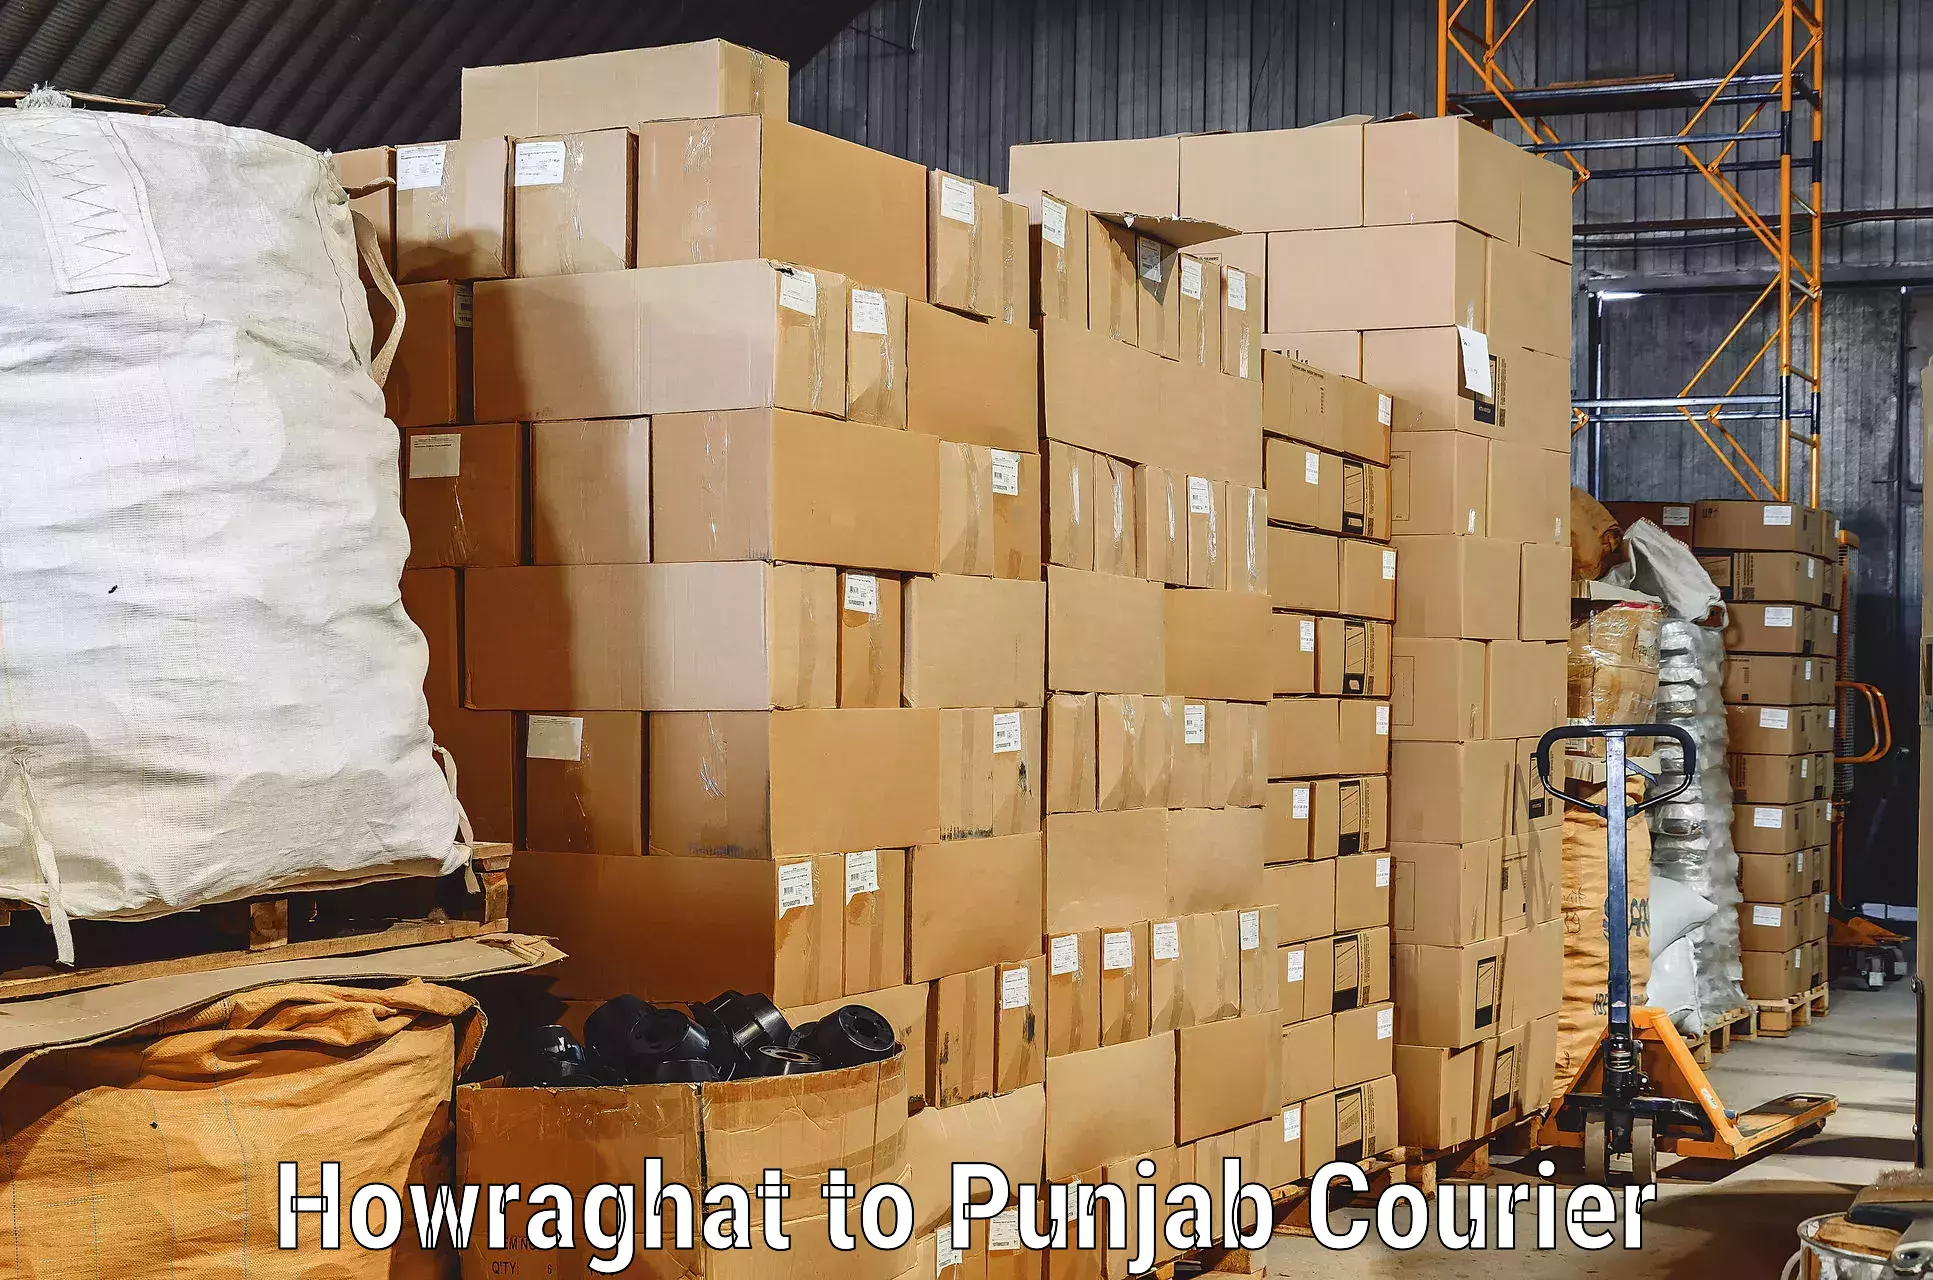 Tailored furniture transport Howraghat to Patiala